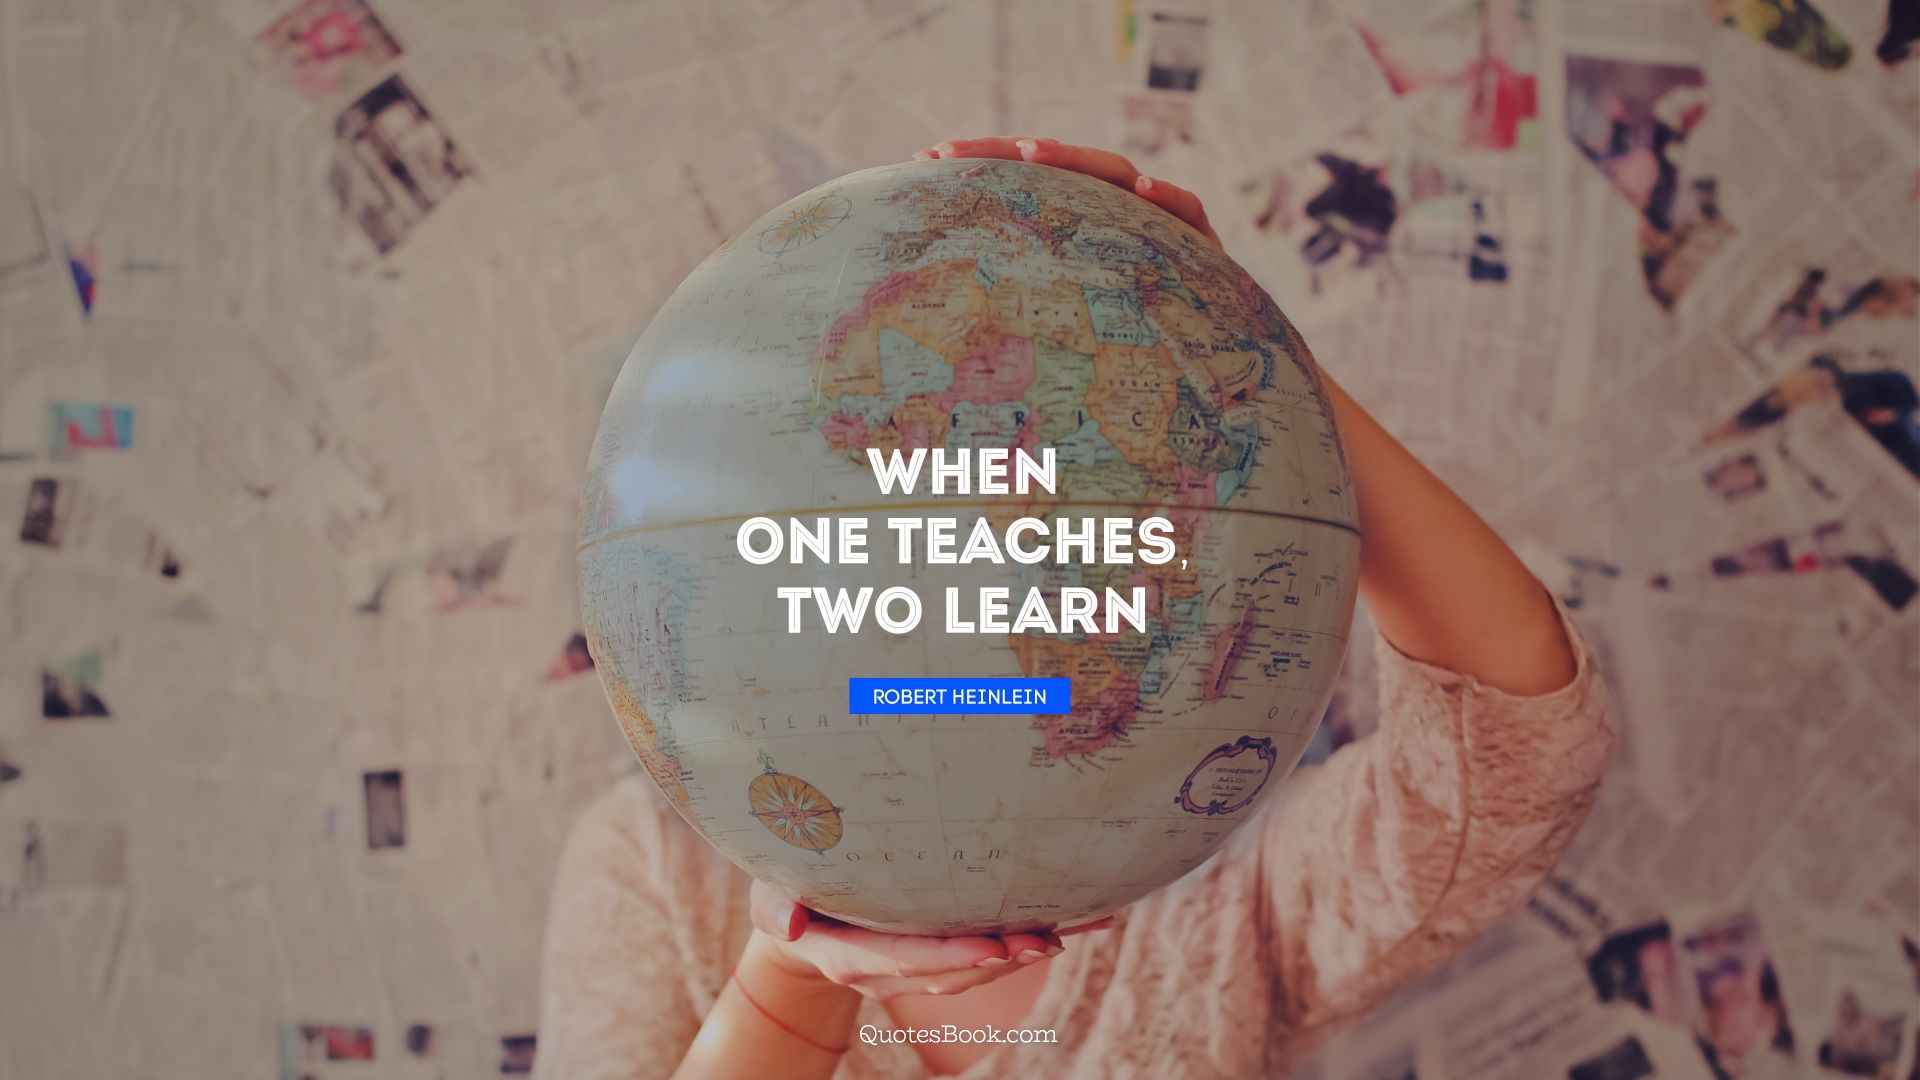 When one teaches, two learn. - Quote by Robert Heinlein